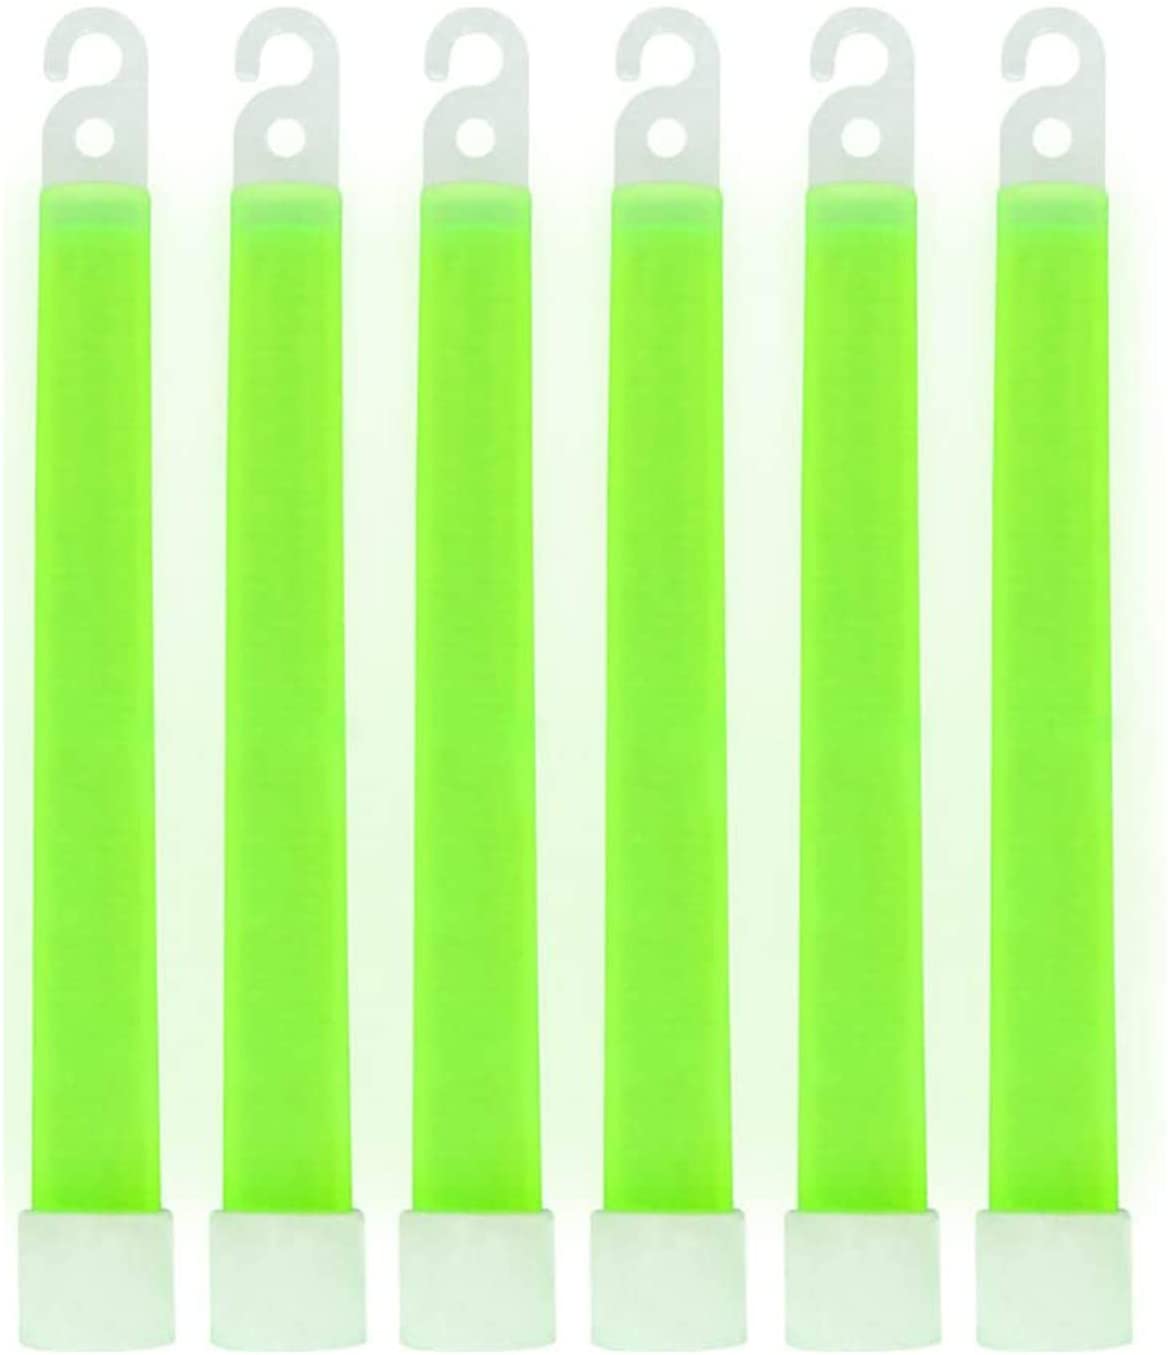 MediTac Green Glow Stick - Bright 6" Snap Sticks With 12 Hour Duration